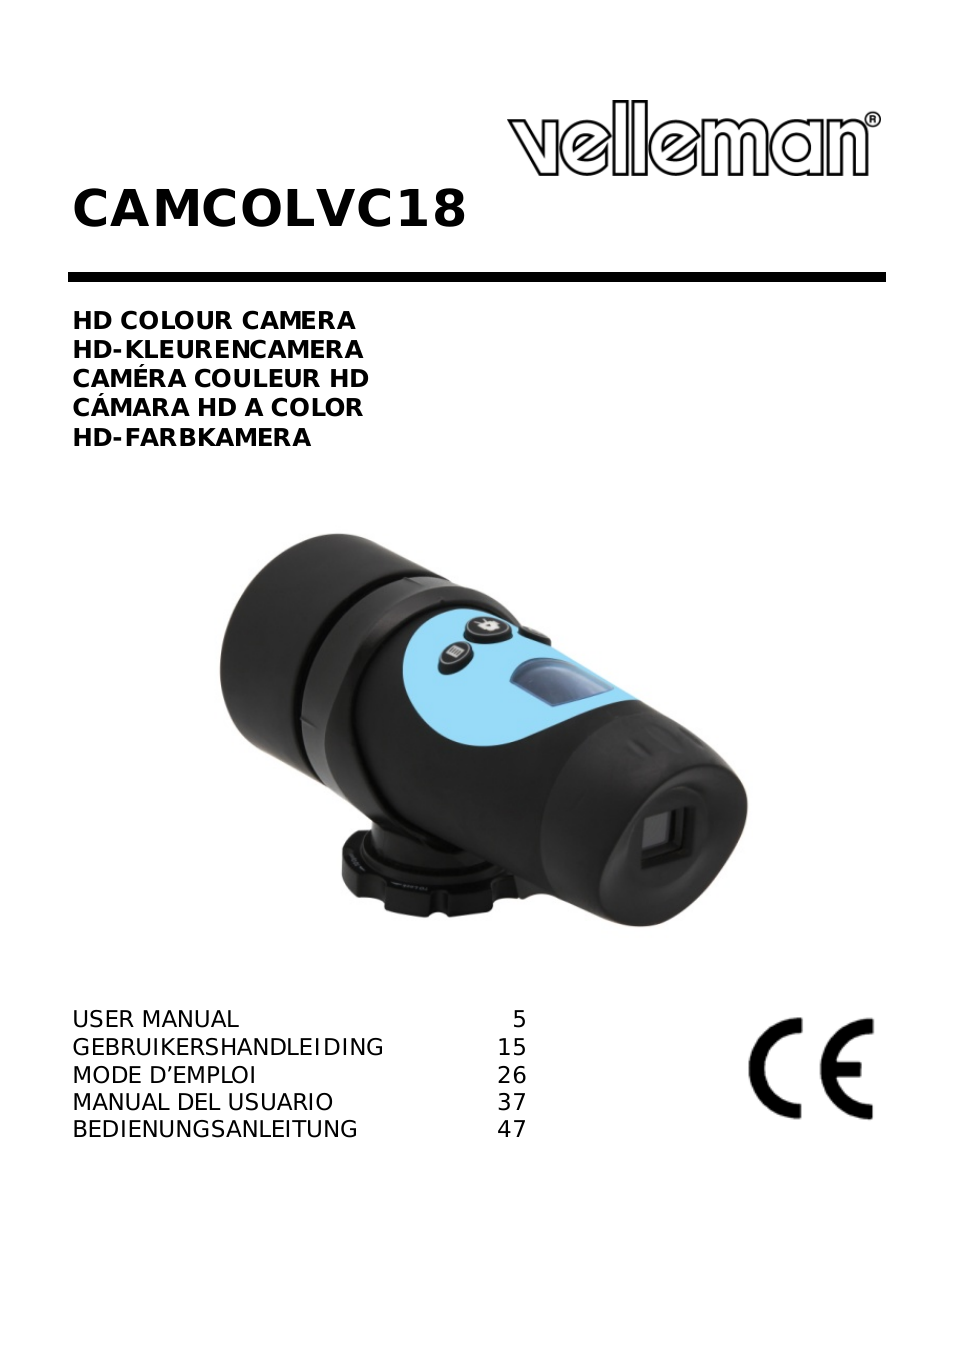 CAMCOLVC18